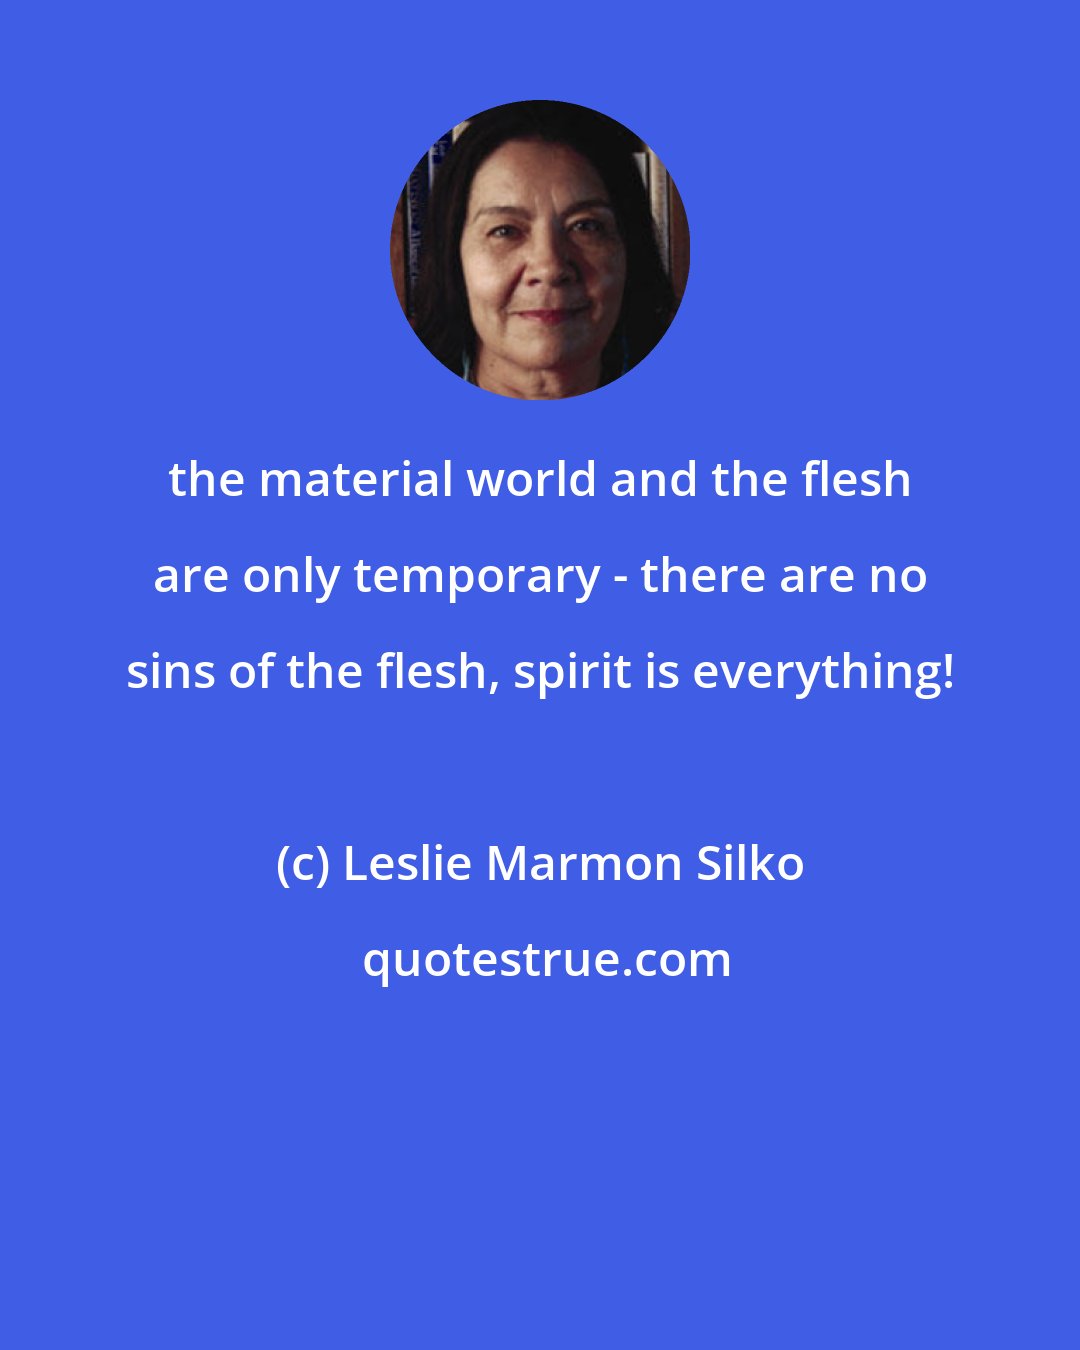 Leslie Marmon Silko: the material world and the flesh are only temporary - there are no sins of the flesh, spirit is everything!